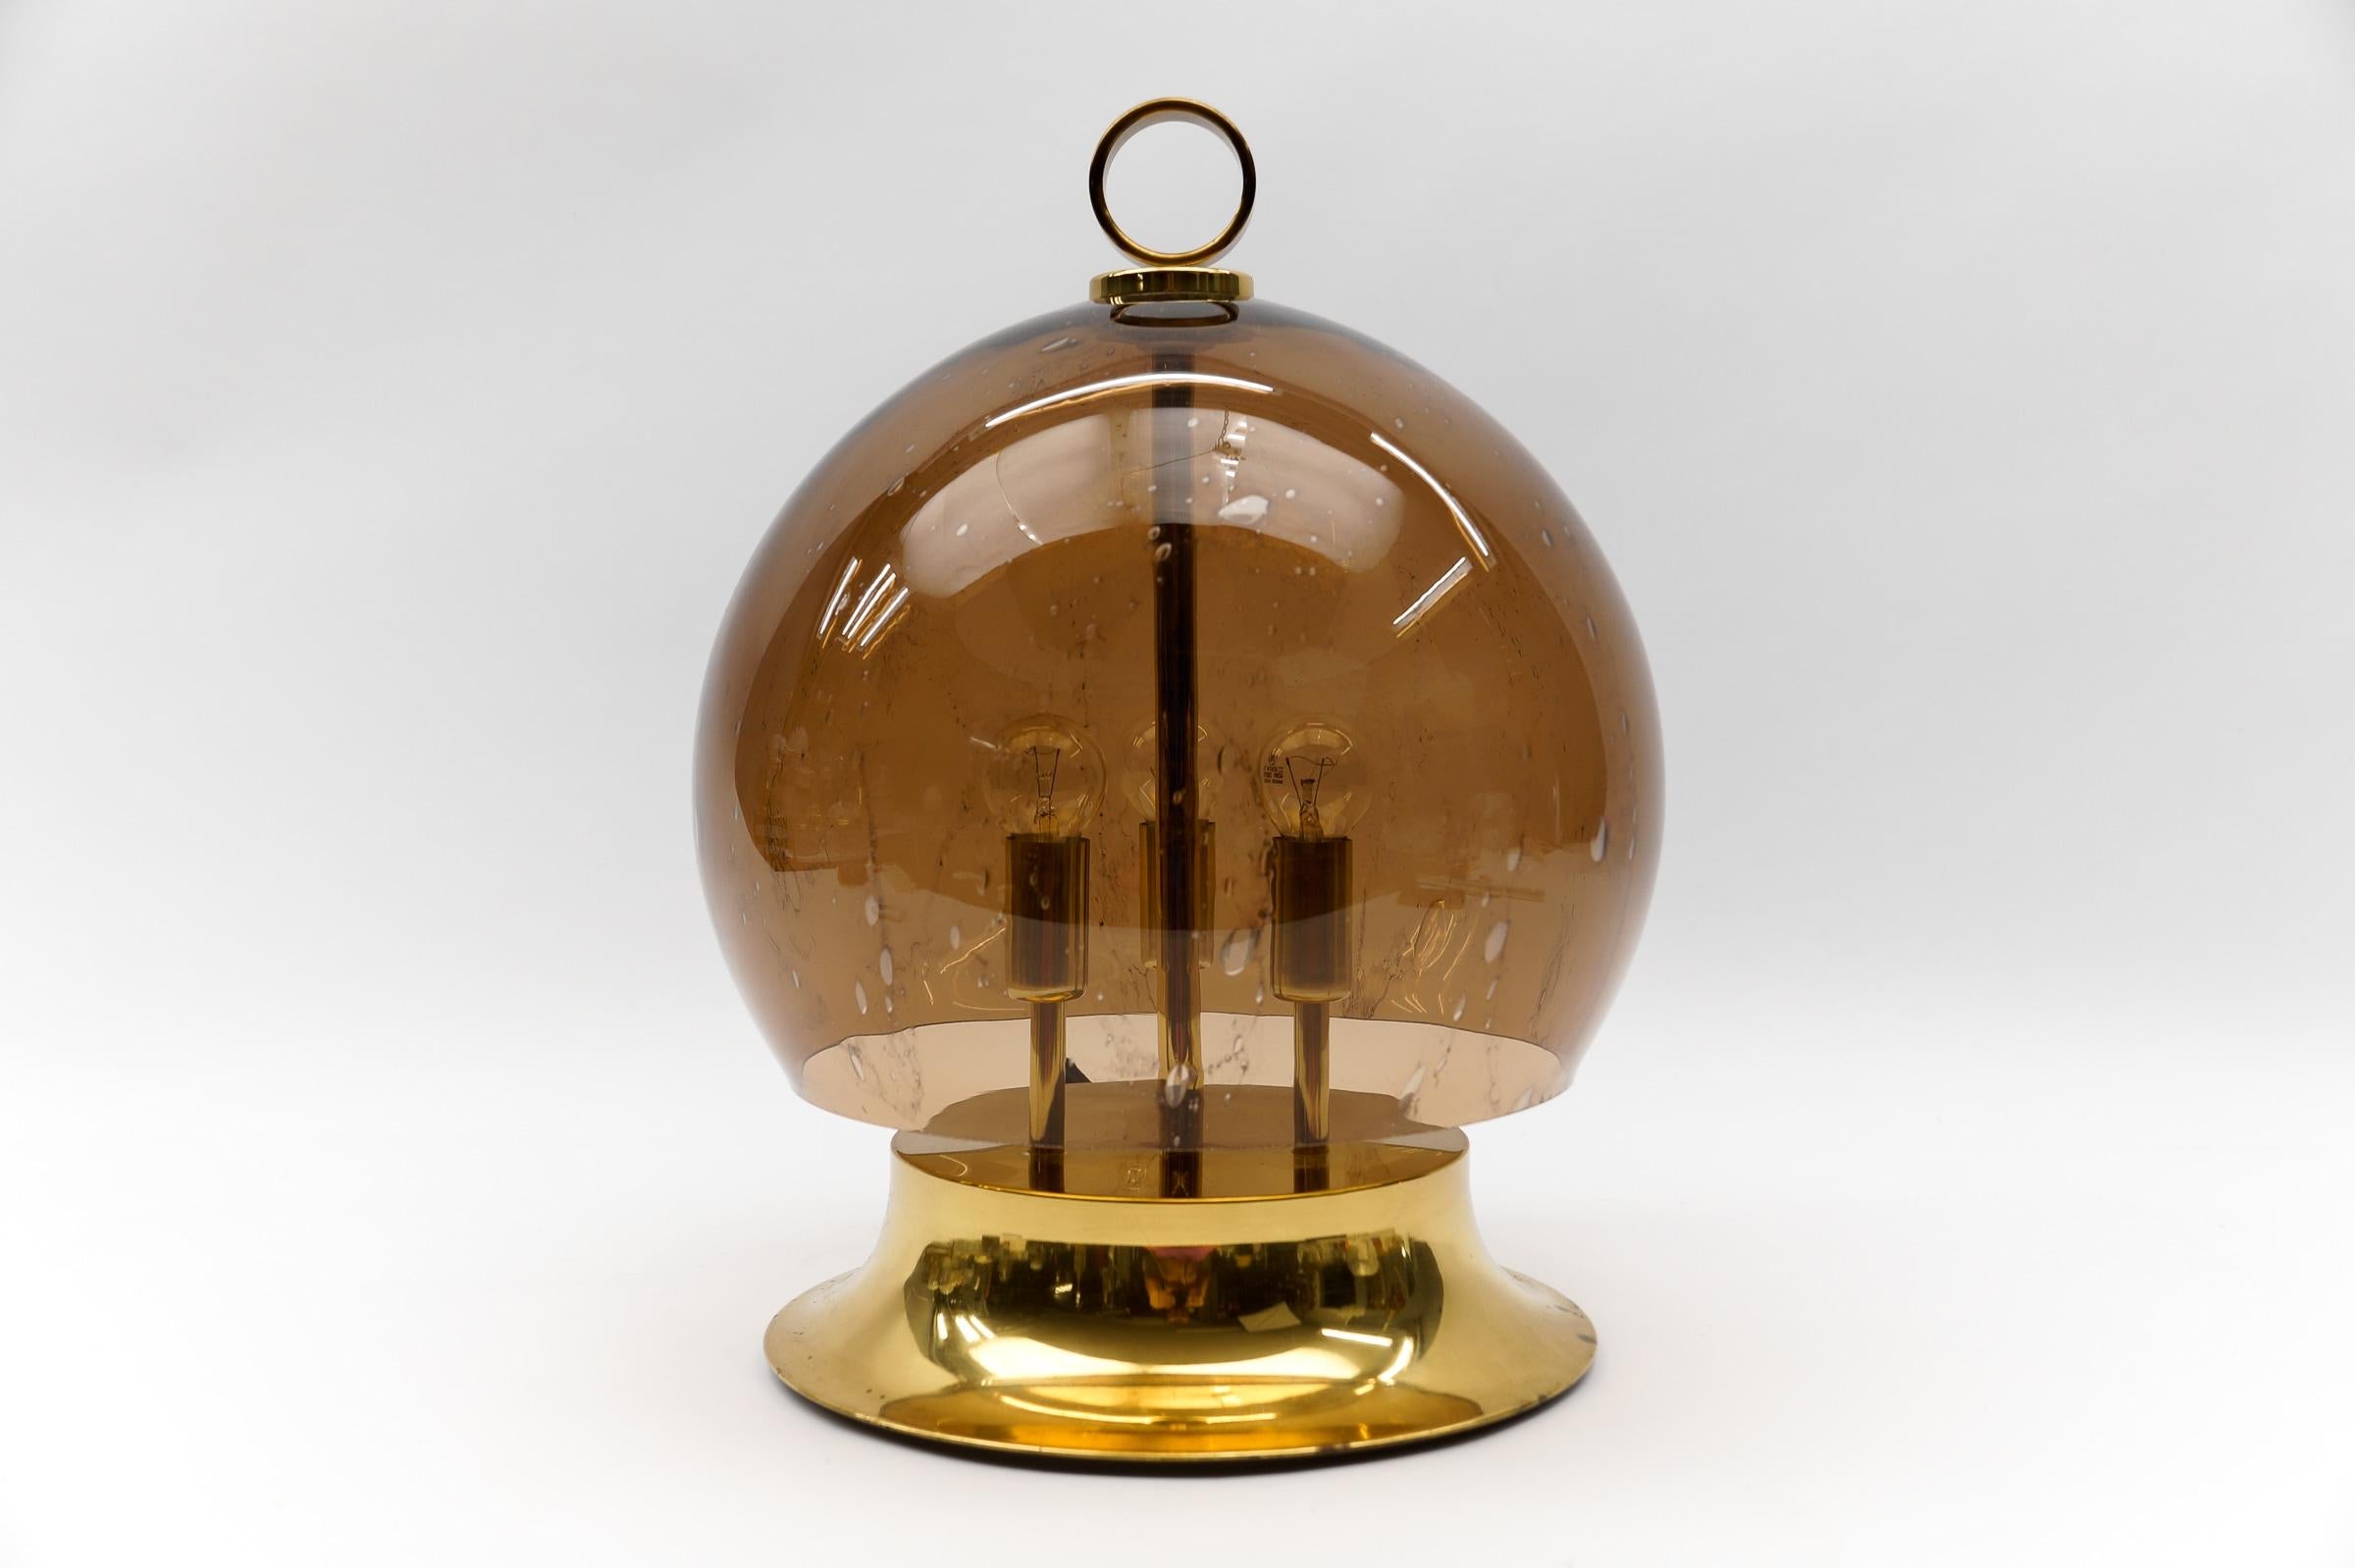 Mid-Century Modern Table Lamp made in Brass and Glass, 1960s

This golden table lamp features a mouth-blown smoked glass globe.

Dimension
Height: 21.25 in (54 cm)
Diameter: 17.71 in (45 cm)

The lamp needs 3 x E14 / E15 Edison screw fit bulb, is